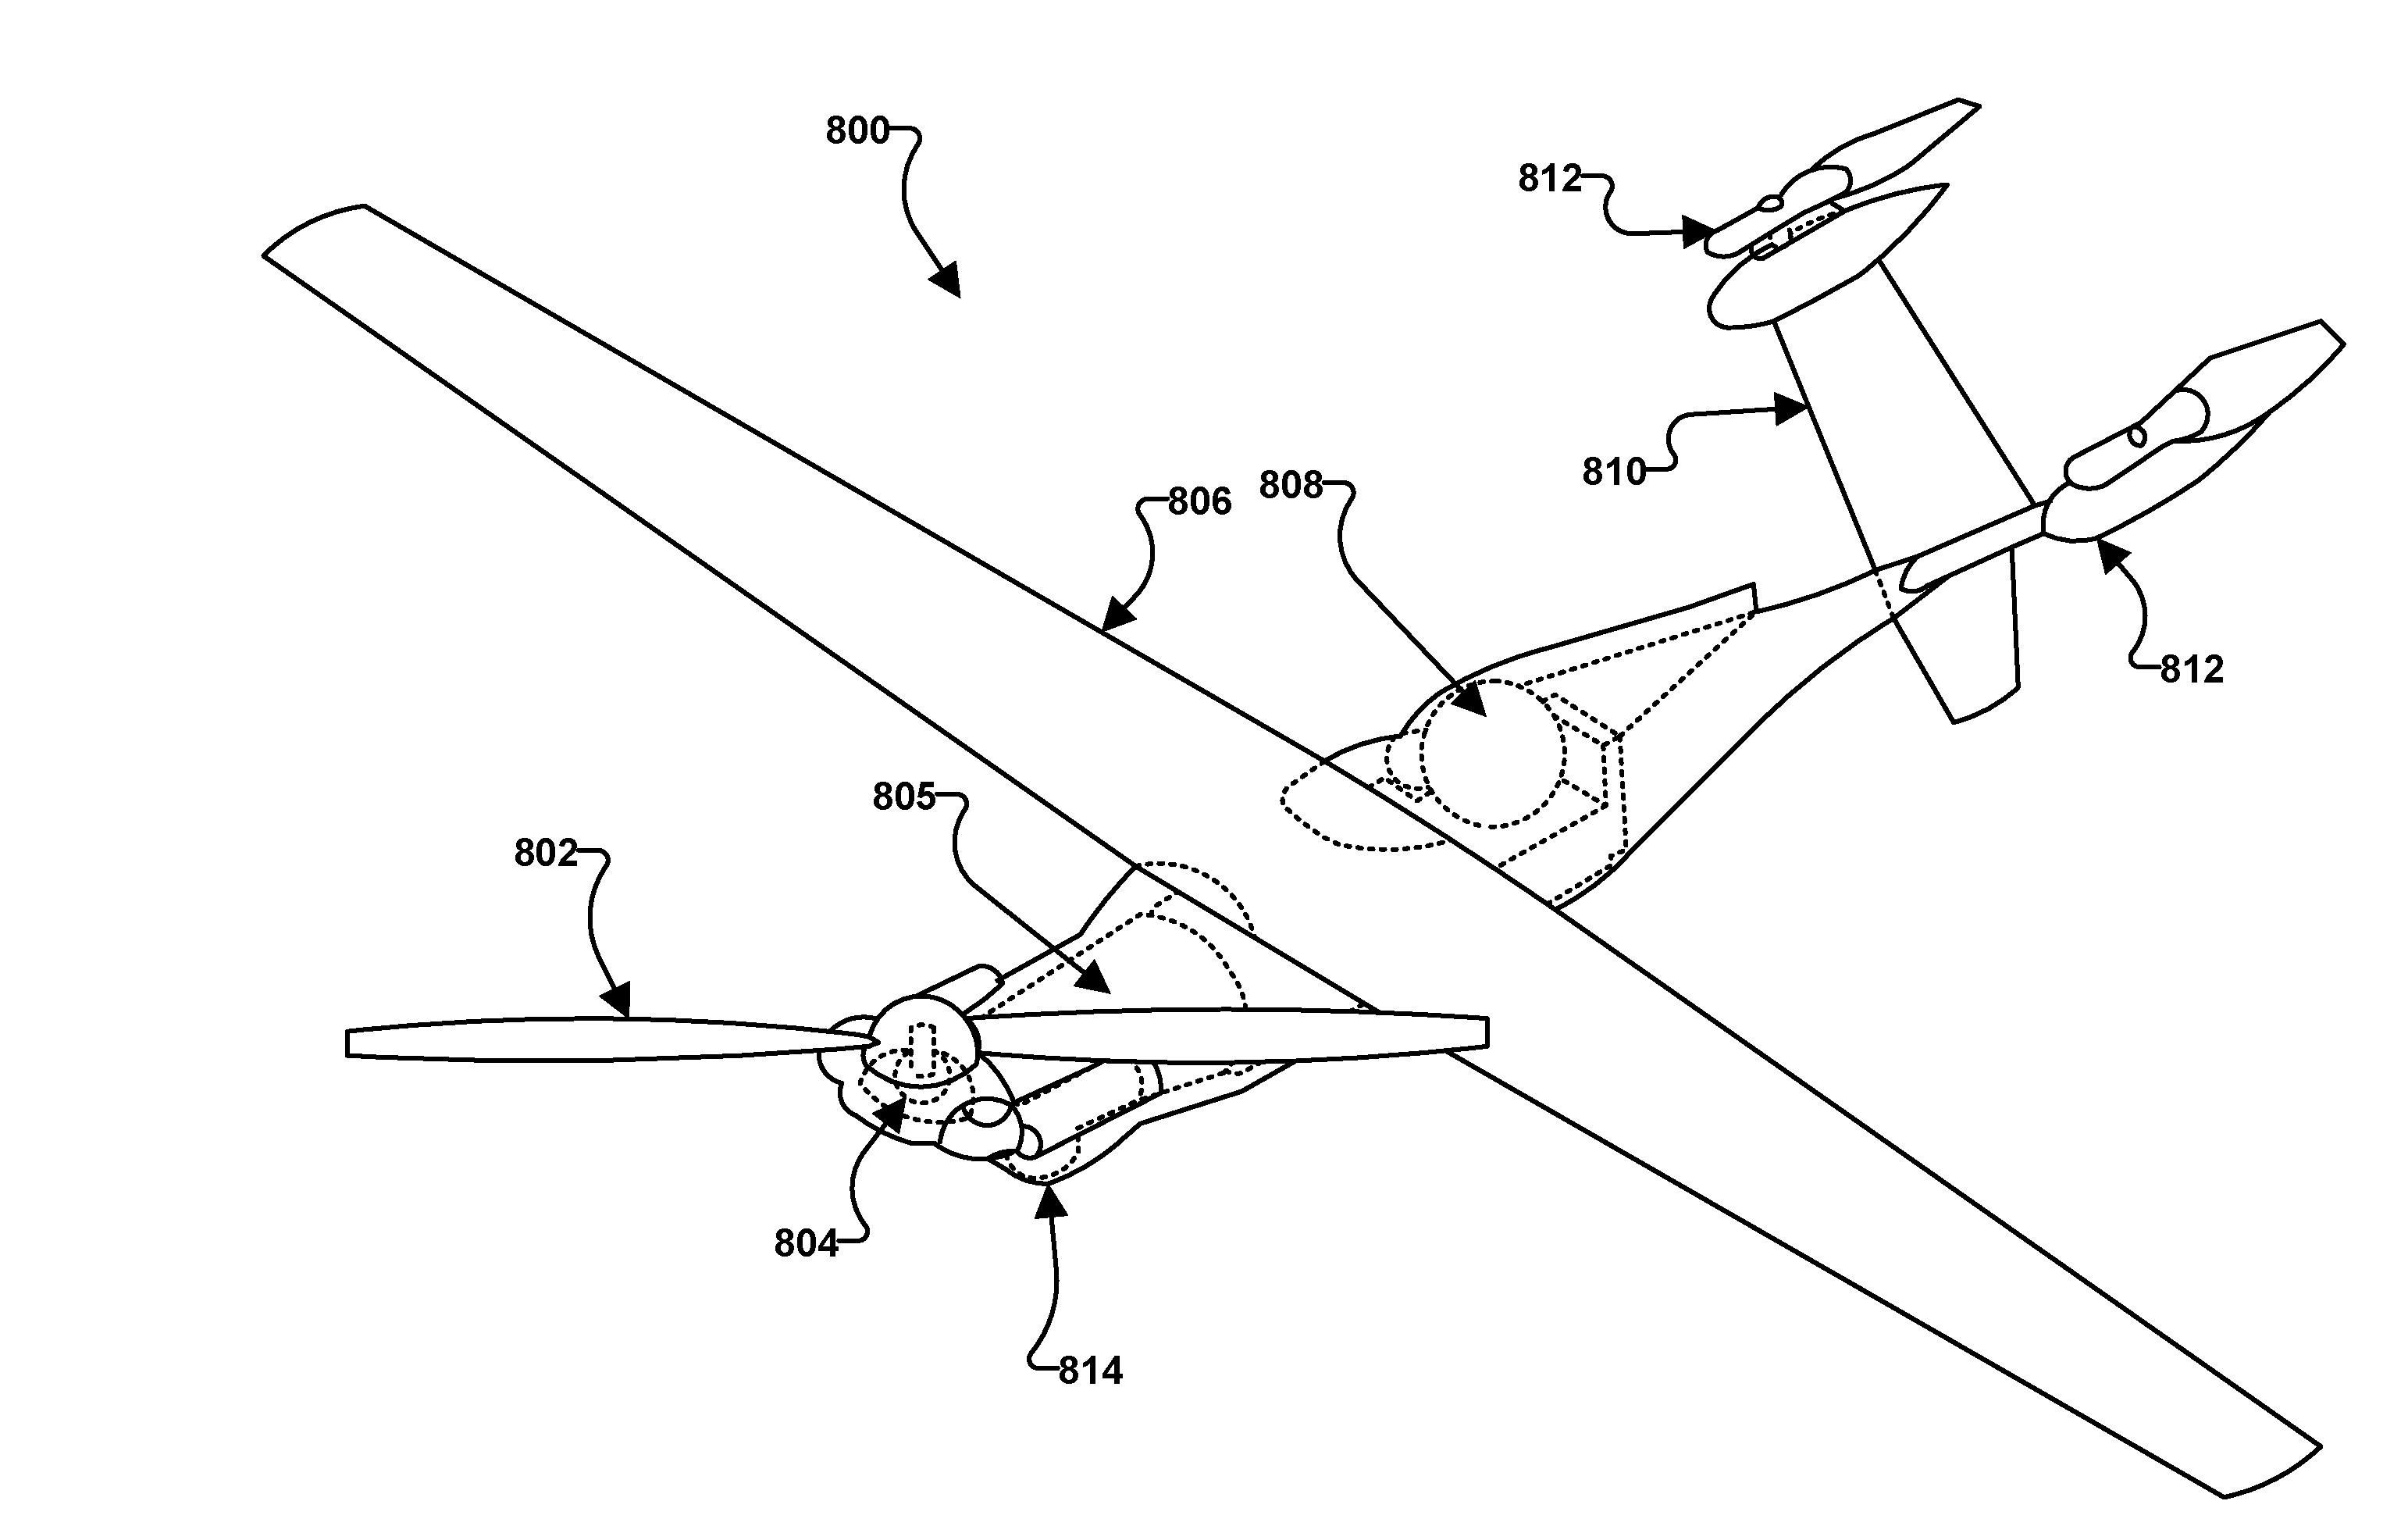 Tri-Rotor Aircraft Capable of Vertical Takeoff and Landing and Transitioning to Forward Flight